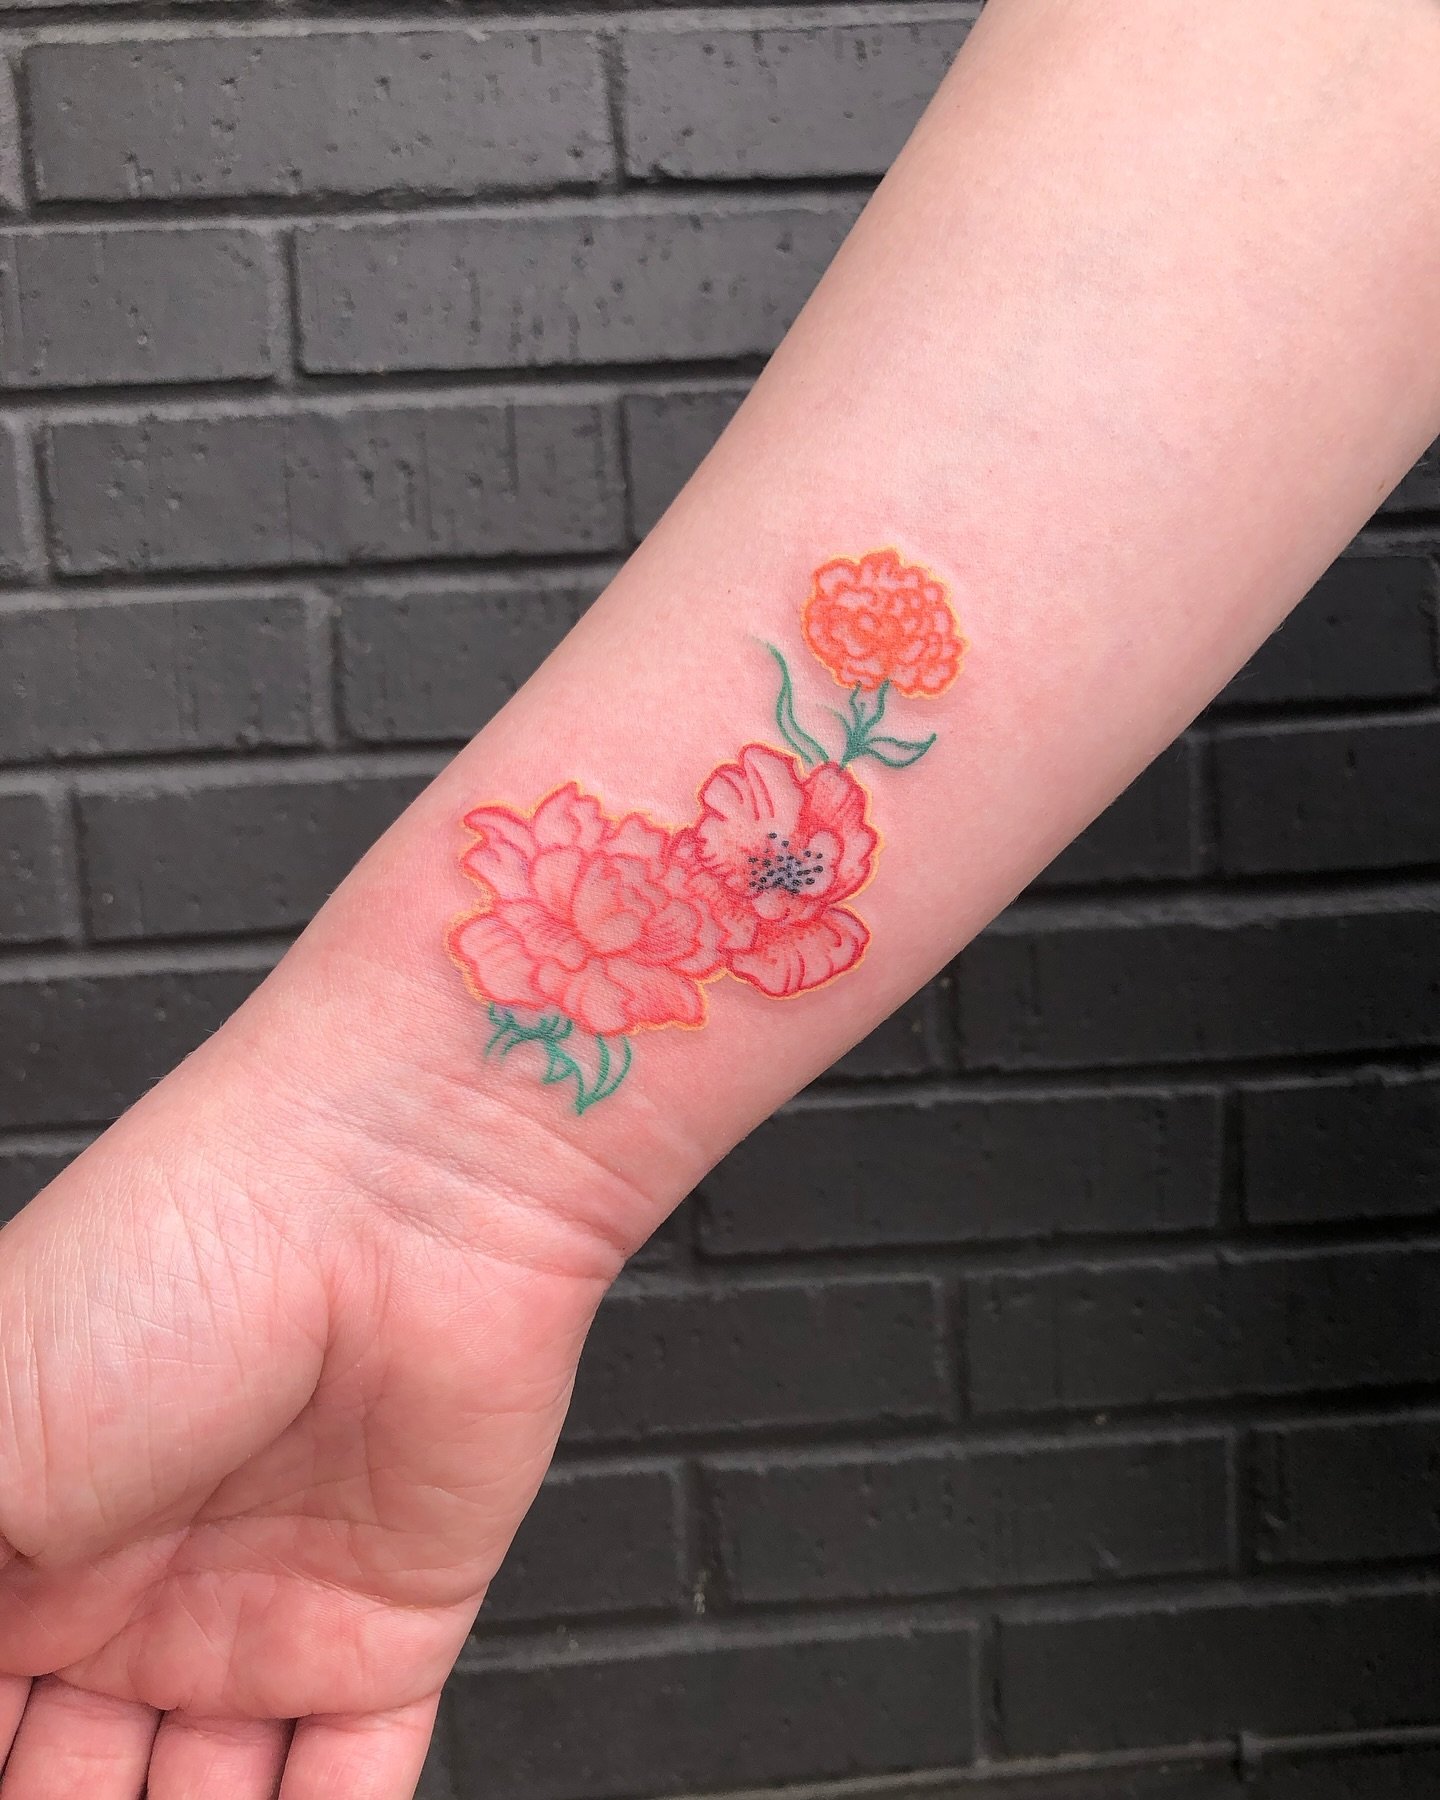 Who has booked their MINIMUM MONDAY? There are some spots available for July &amp; August. Get a smaller tattoo at my minimum rate

EMAIL chipperharbin@yahoo.com to book

#flowertattoo #botanicaltattoo #forearmtattoo #customtattoo #watercolortattoos